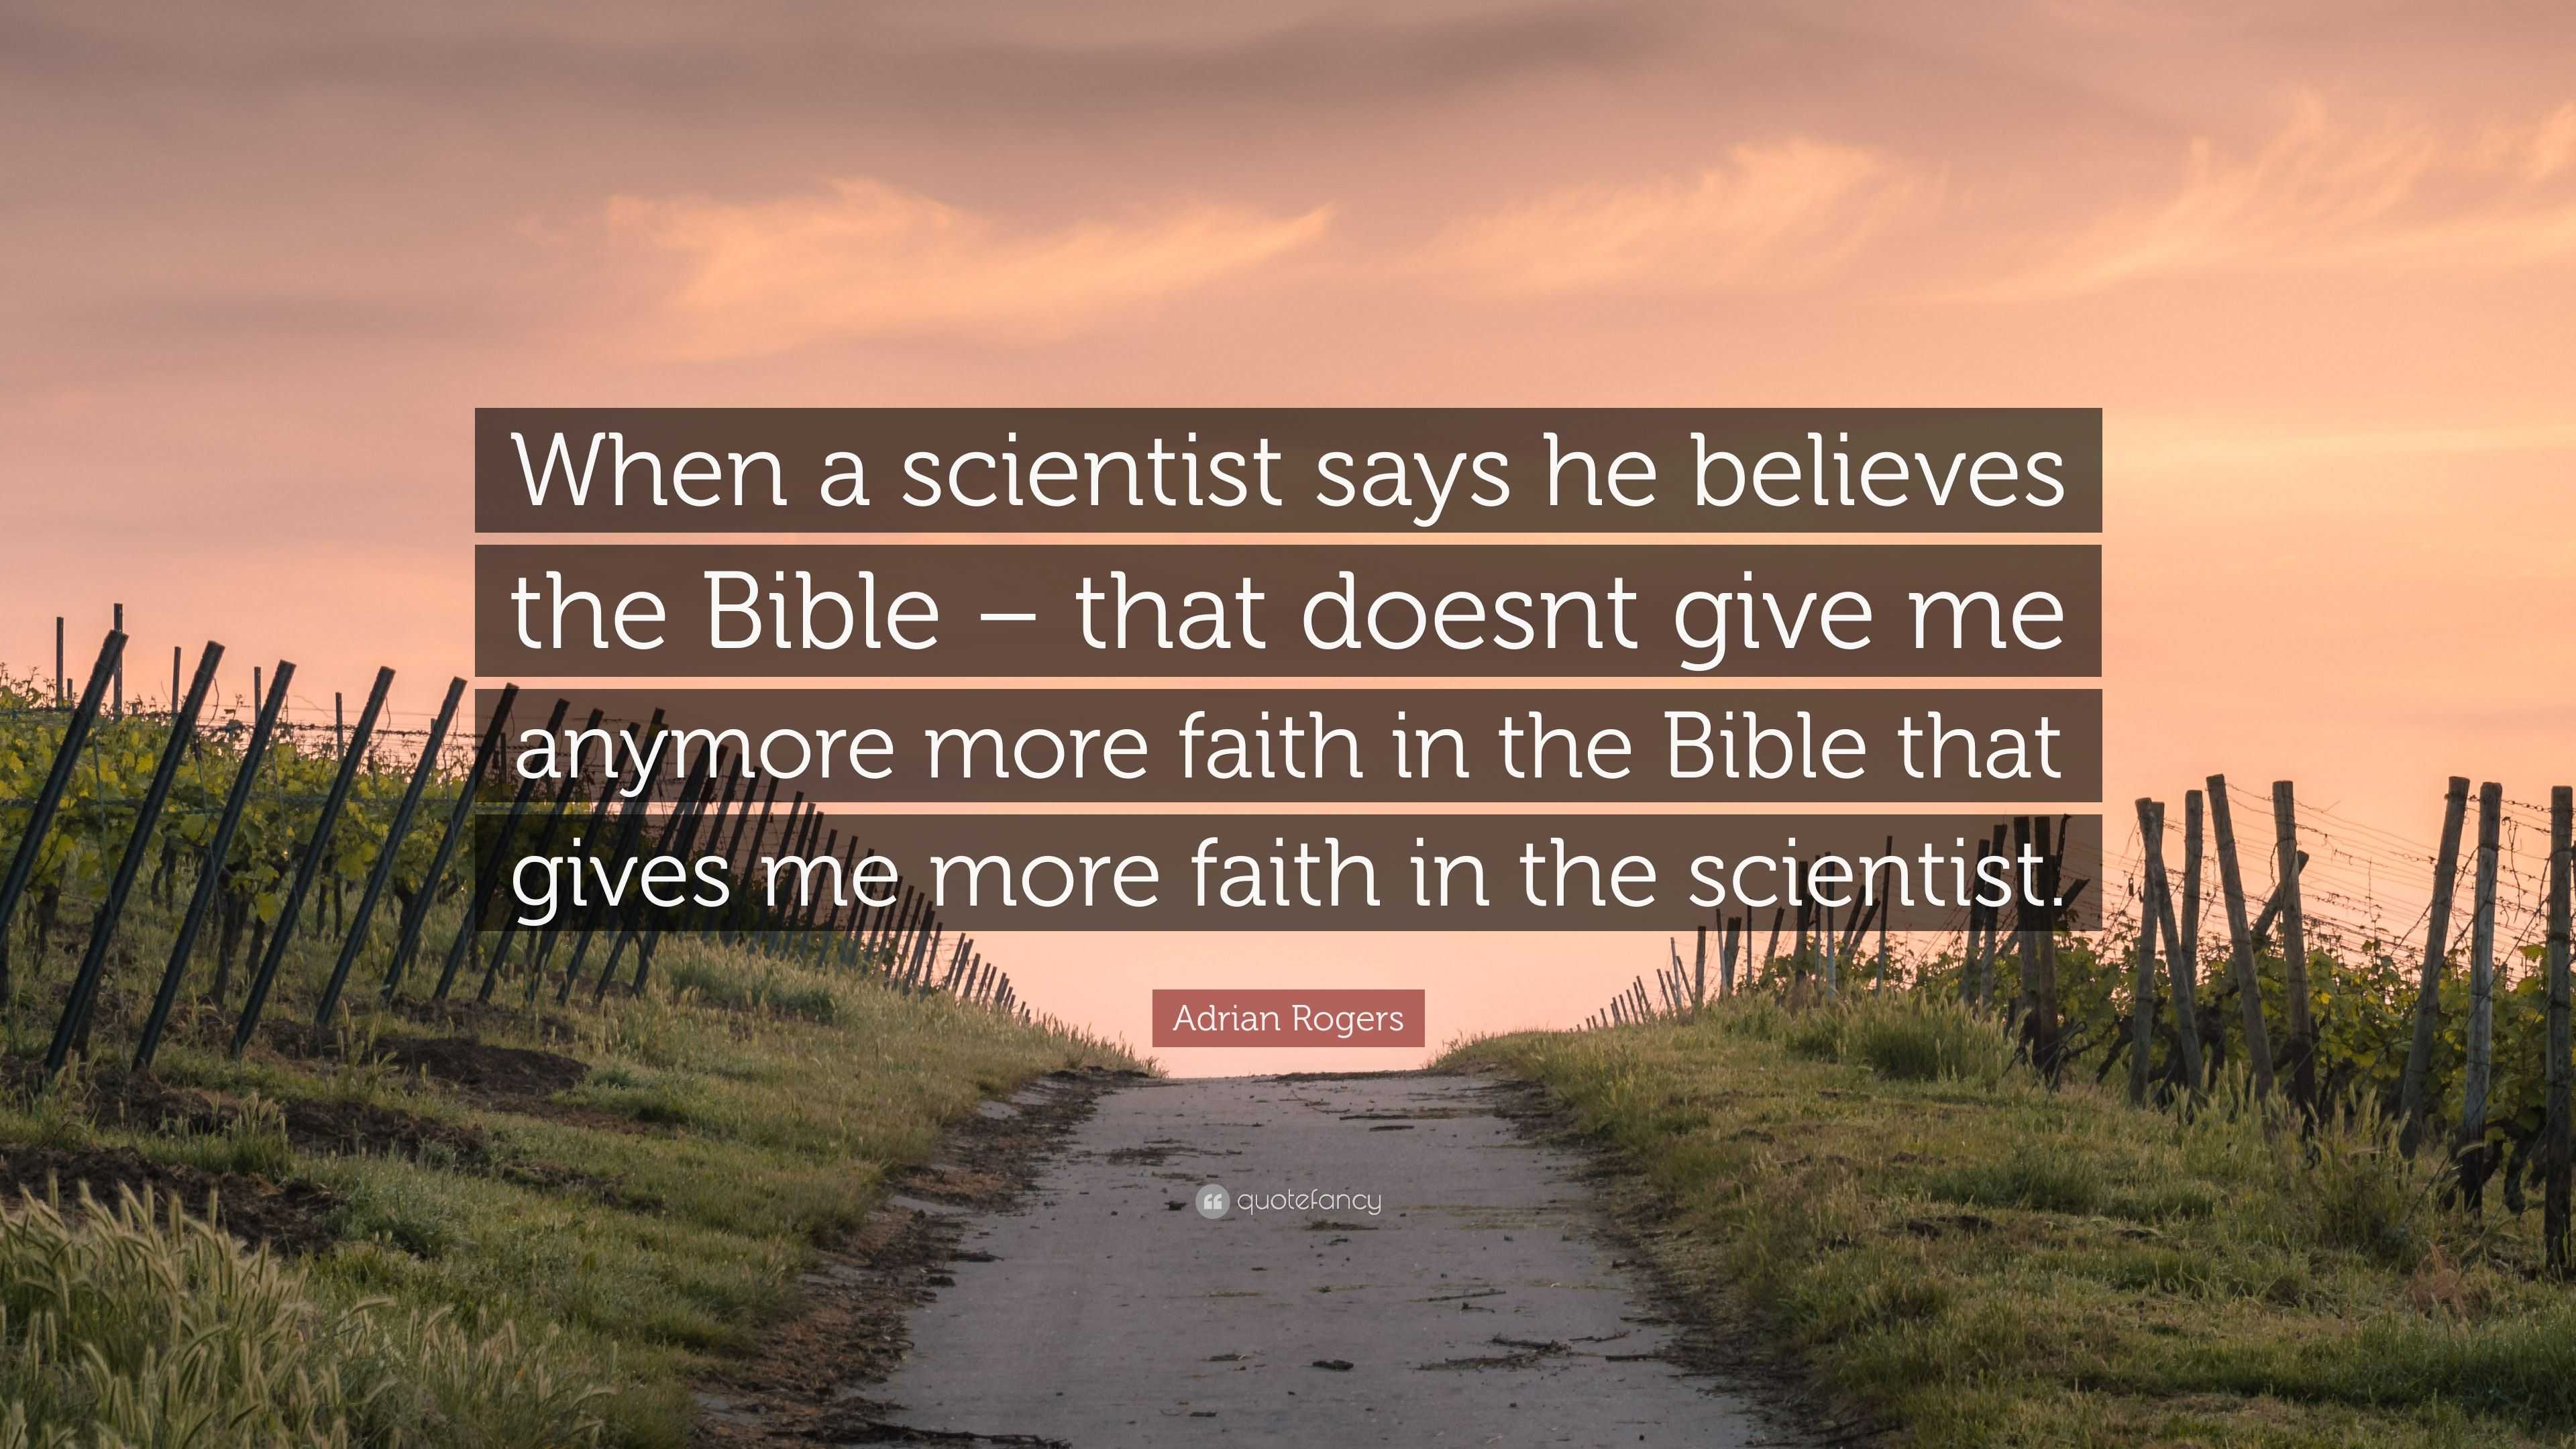 adrian rogers quote: "when a scientist says he believes the